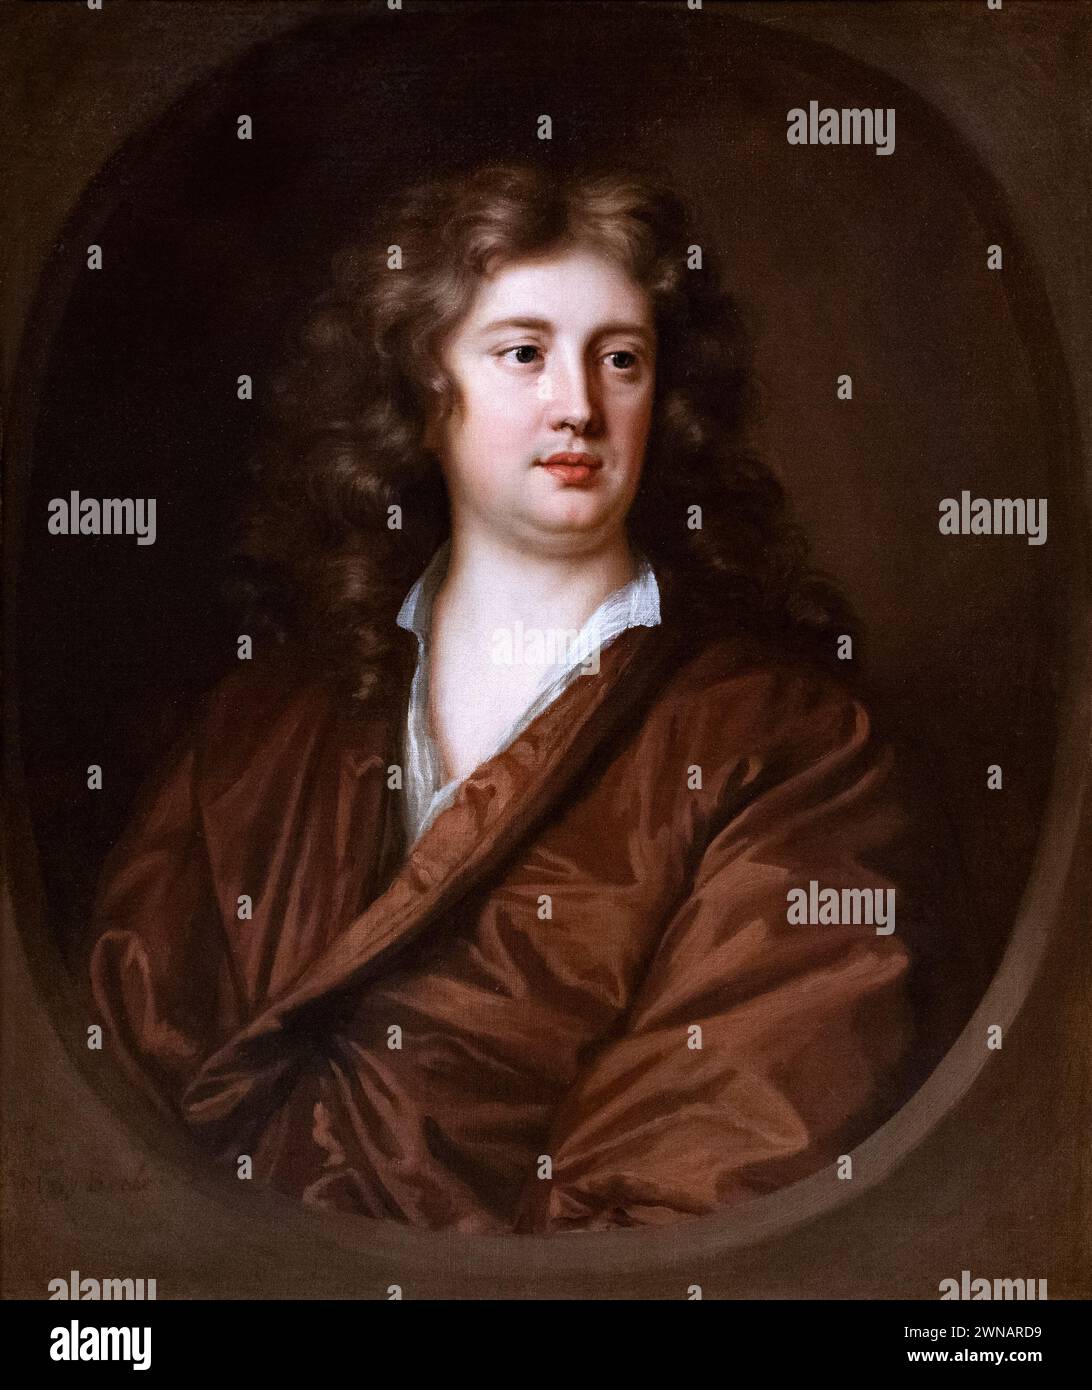 Mary Beale Painting, 'Portrait of a Young Man', 1680. Artista e ritrattista inglese del XVII secolo, 1633-1699 Foto Stock